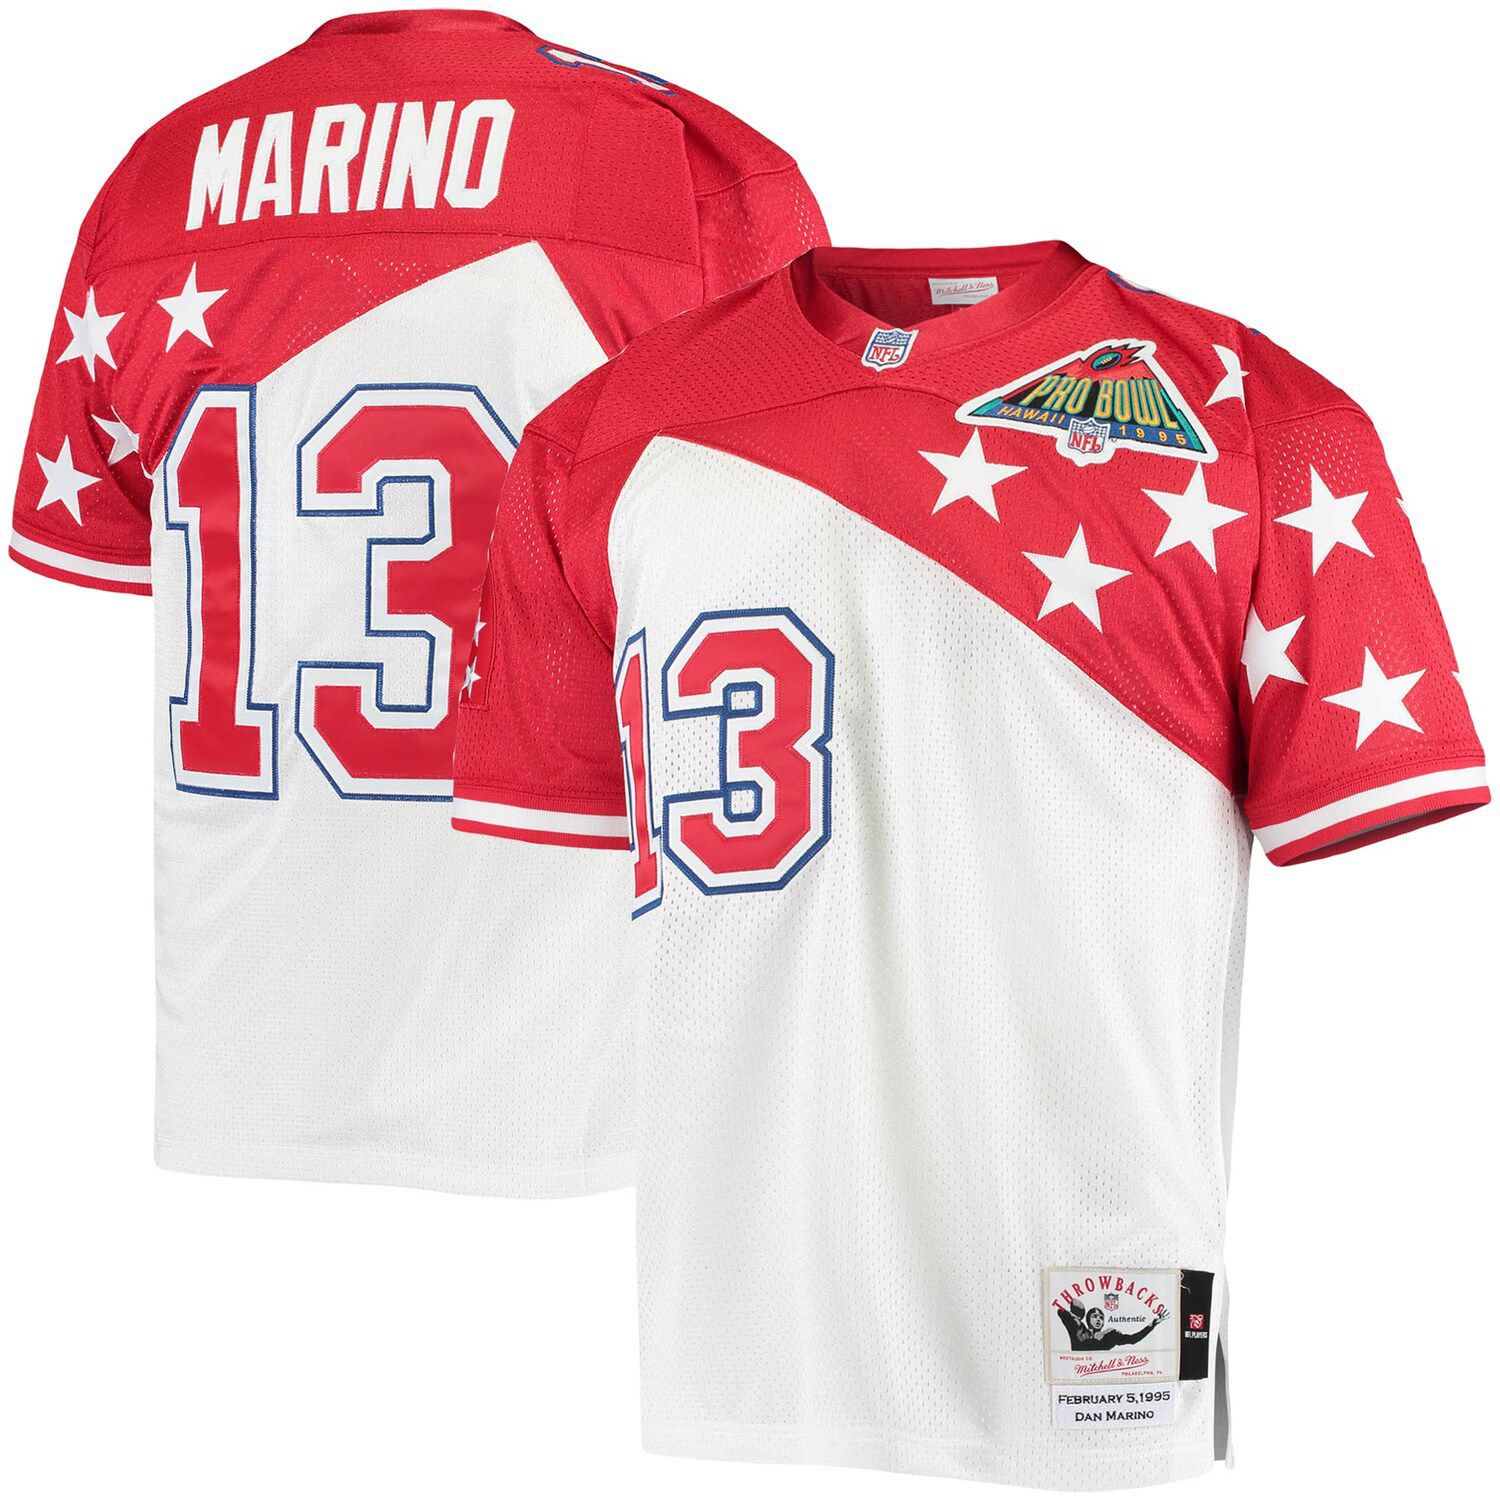 Image for Unbranded Men's Mitchell & Ness Dan Marino White/Red AFC 1994 Pro Bowl Authentic Jersey at Kohl's.